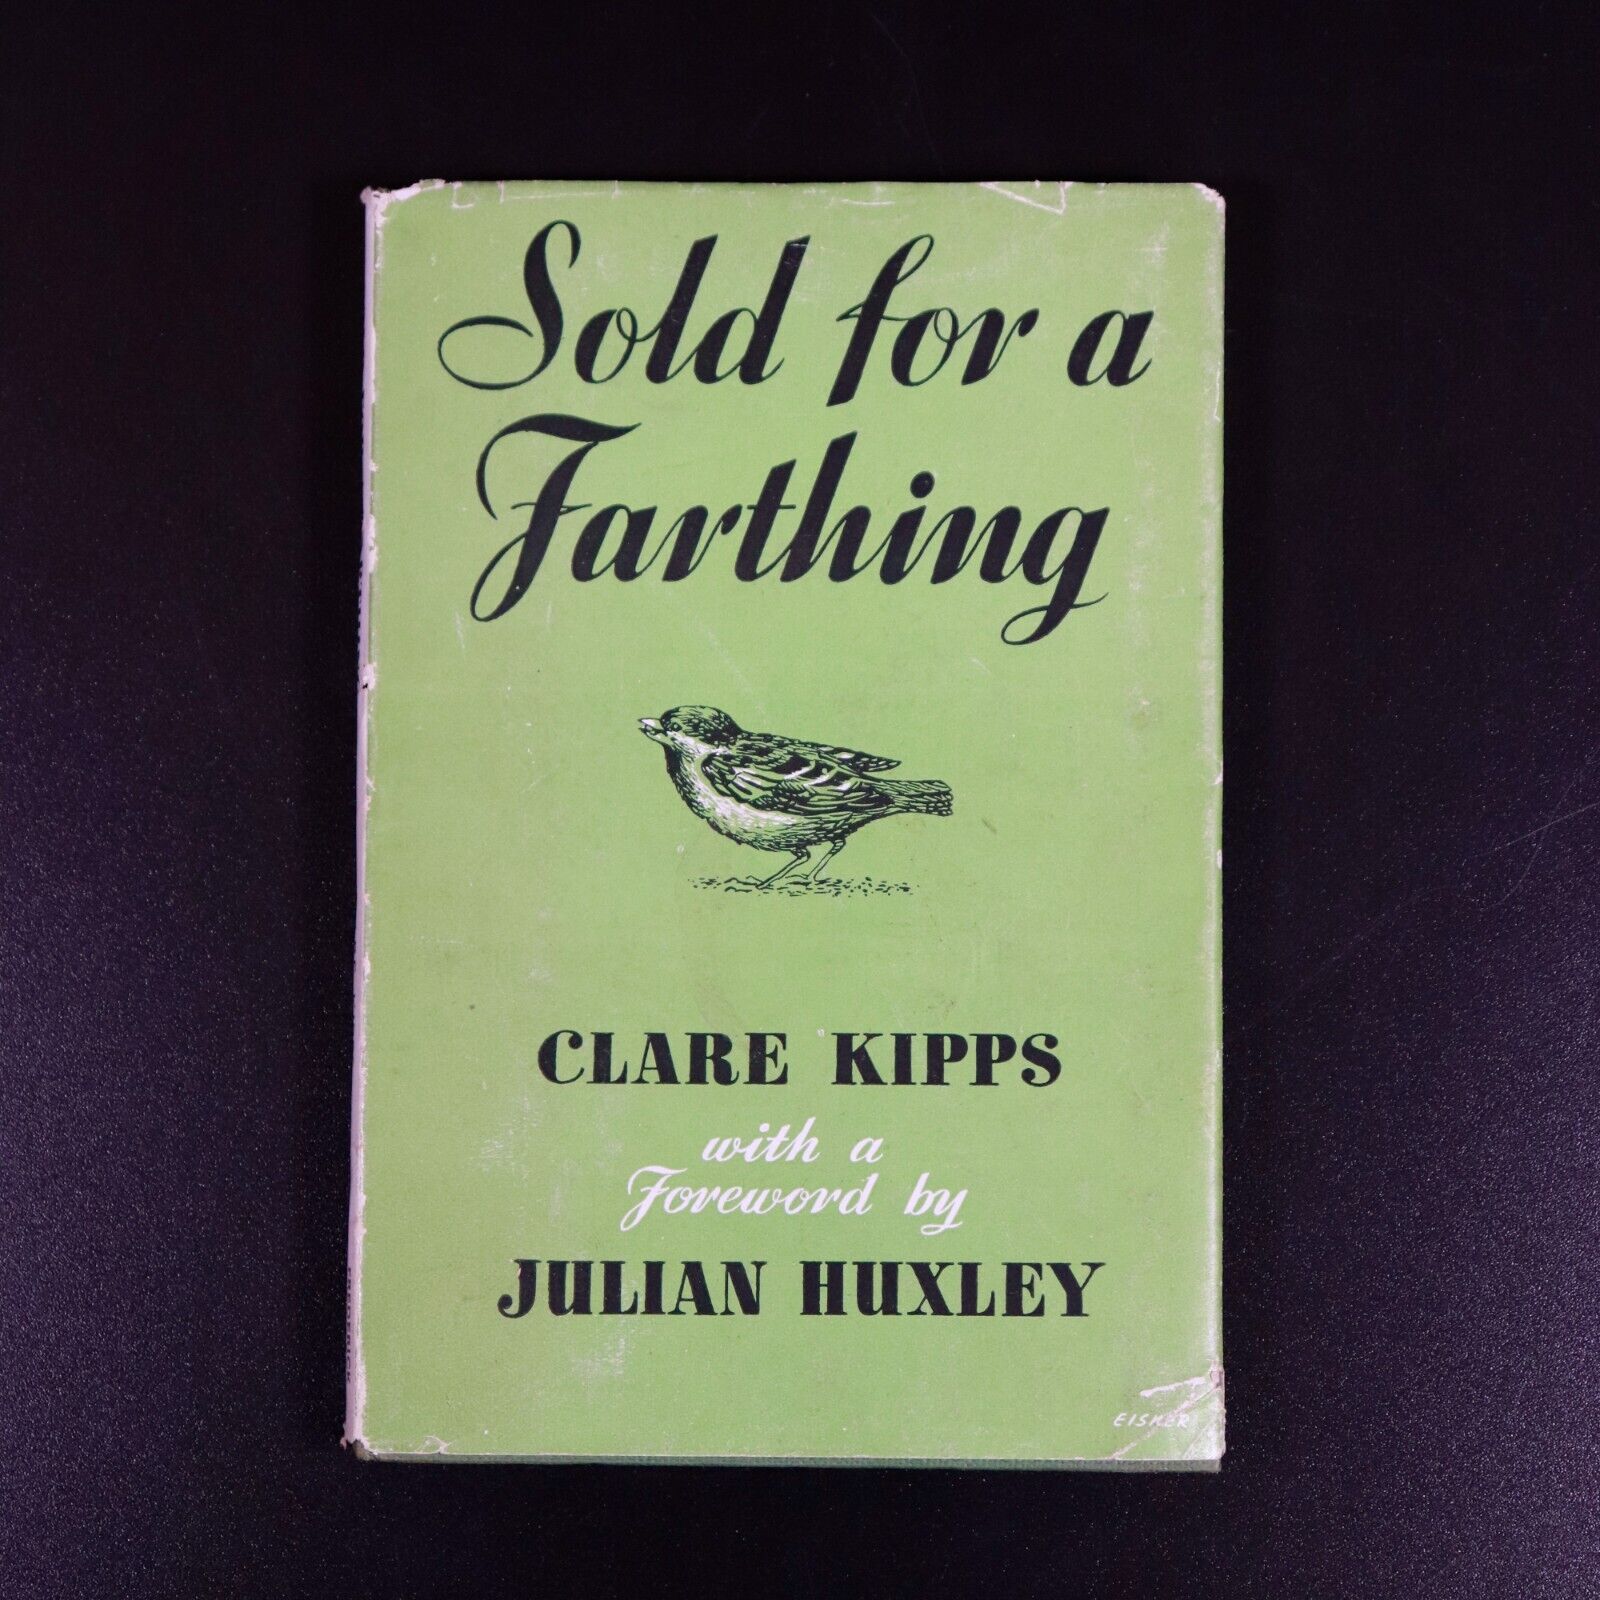 1953 Sold For A Farthing by Clare Kipps - Bird Reference Book Sparrow Fledgling